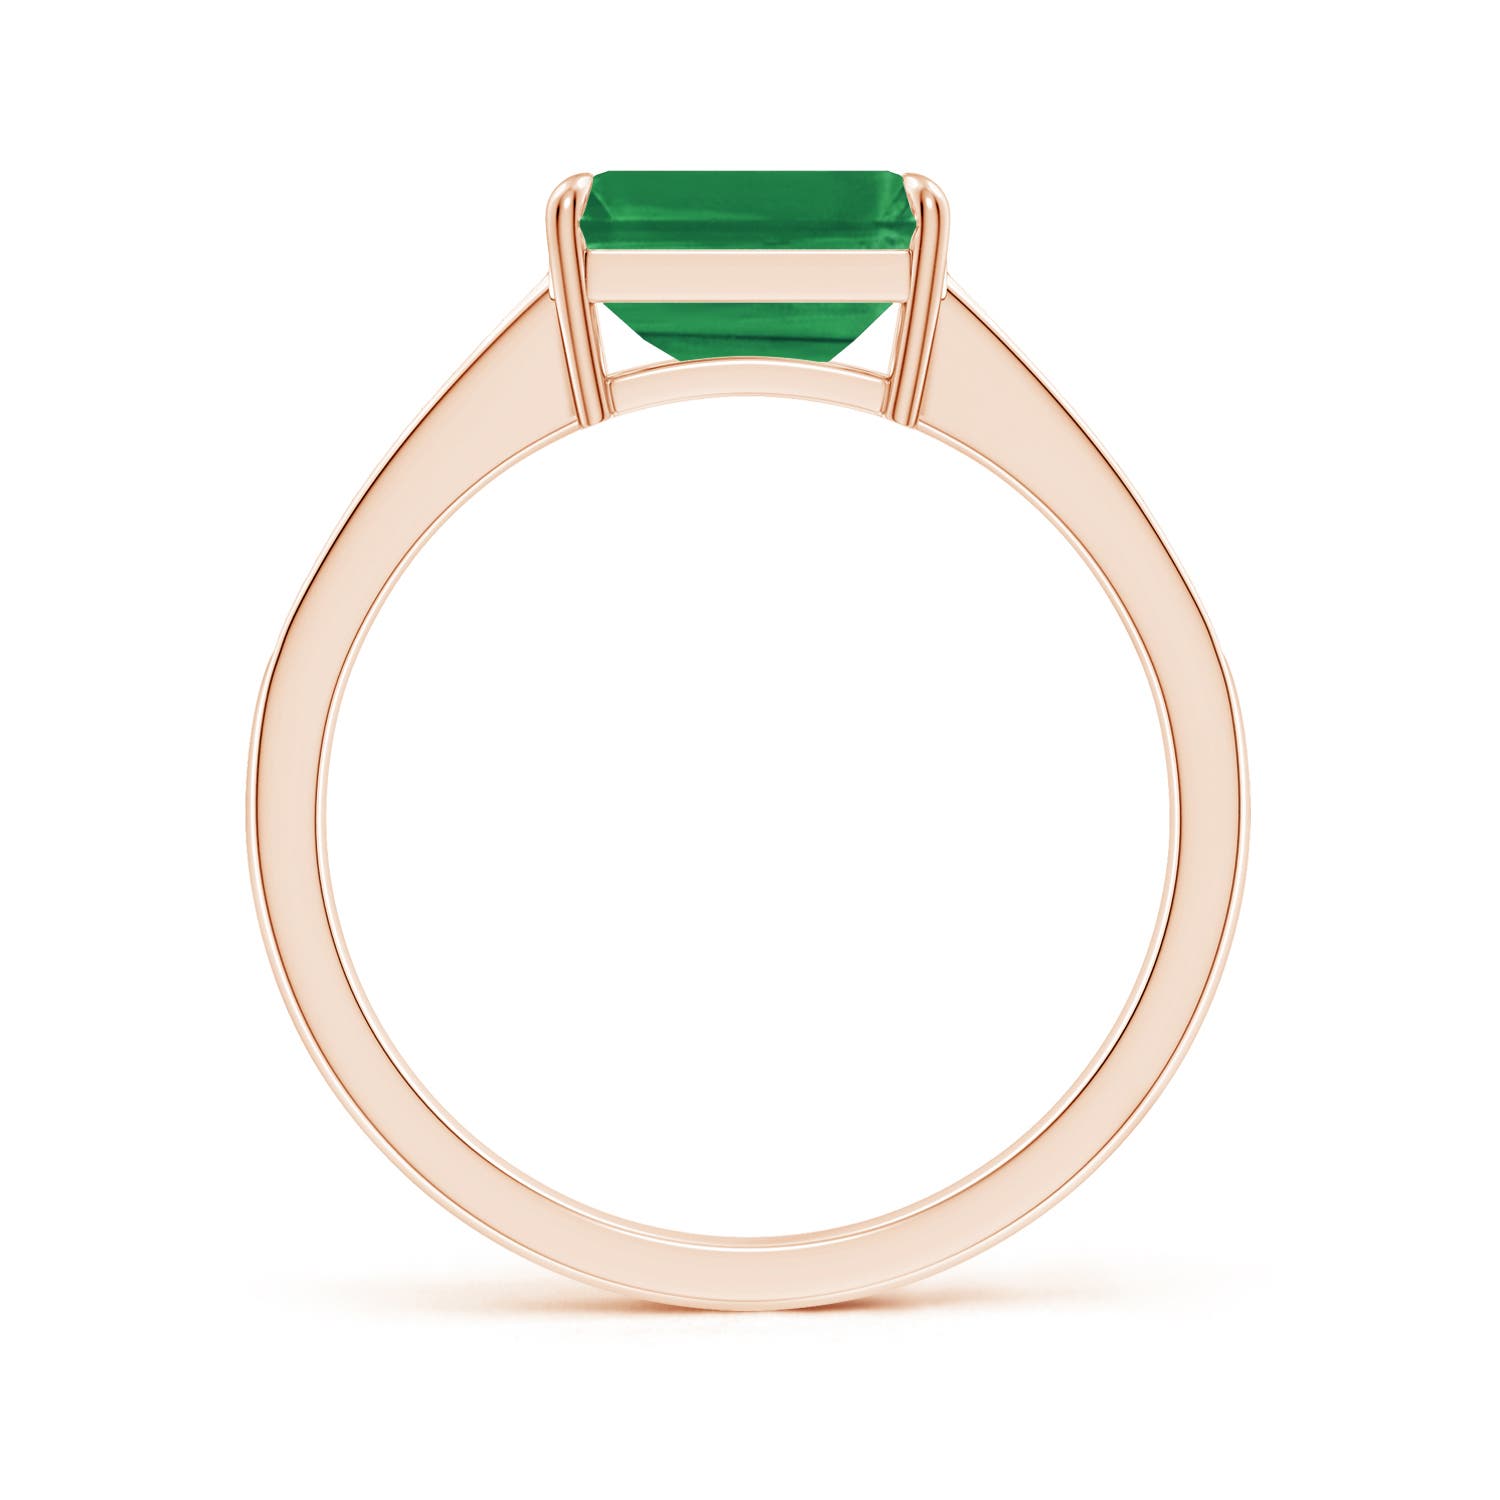 AA - Emerald / 1.82 CT / 14 KT Rose Gold